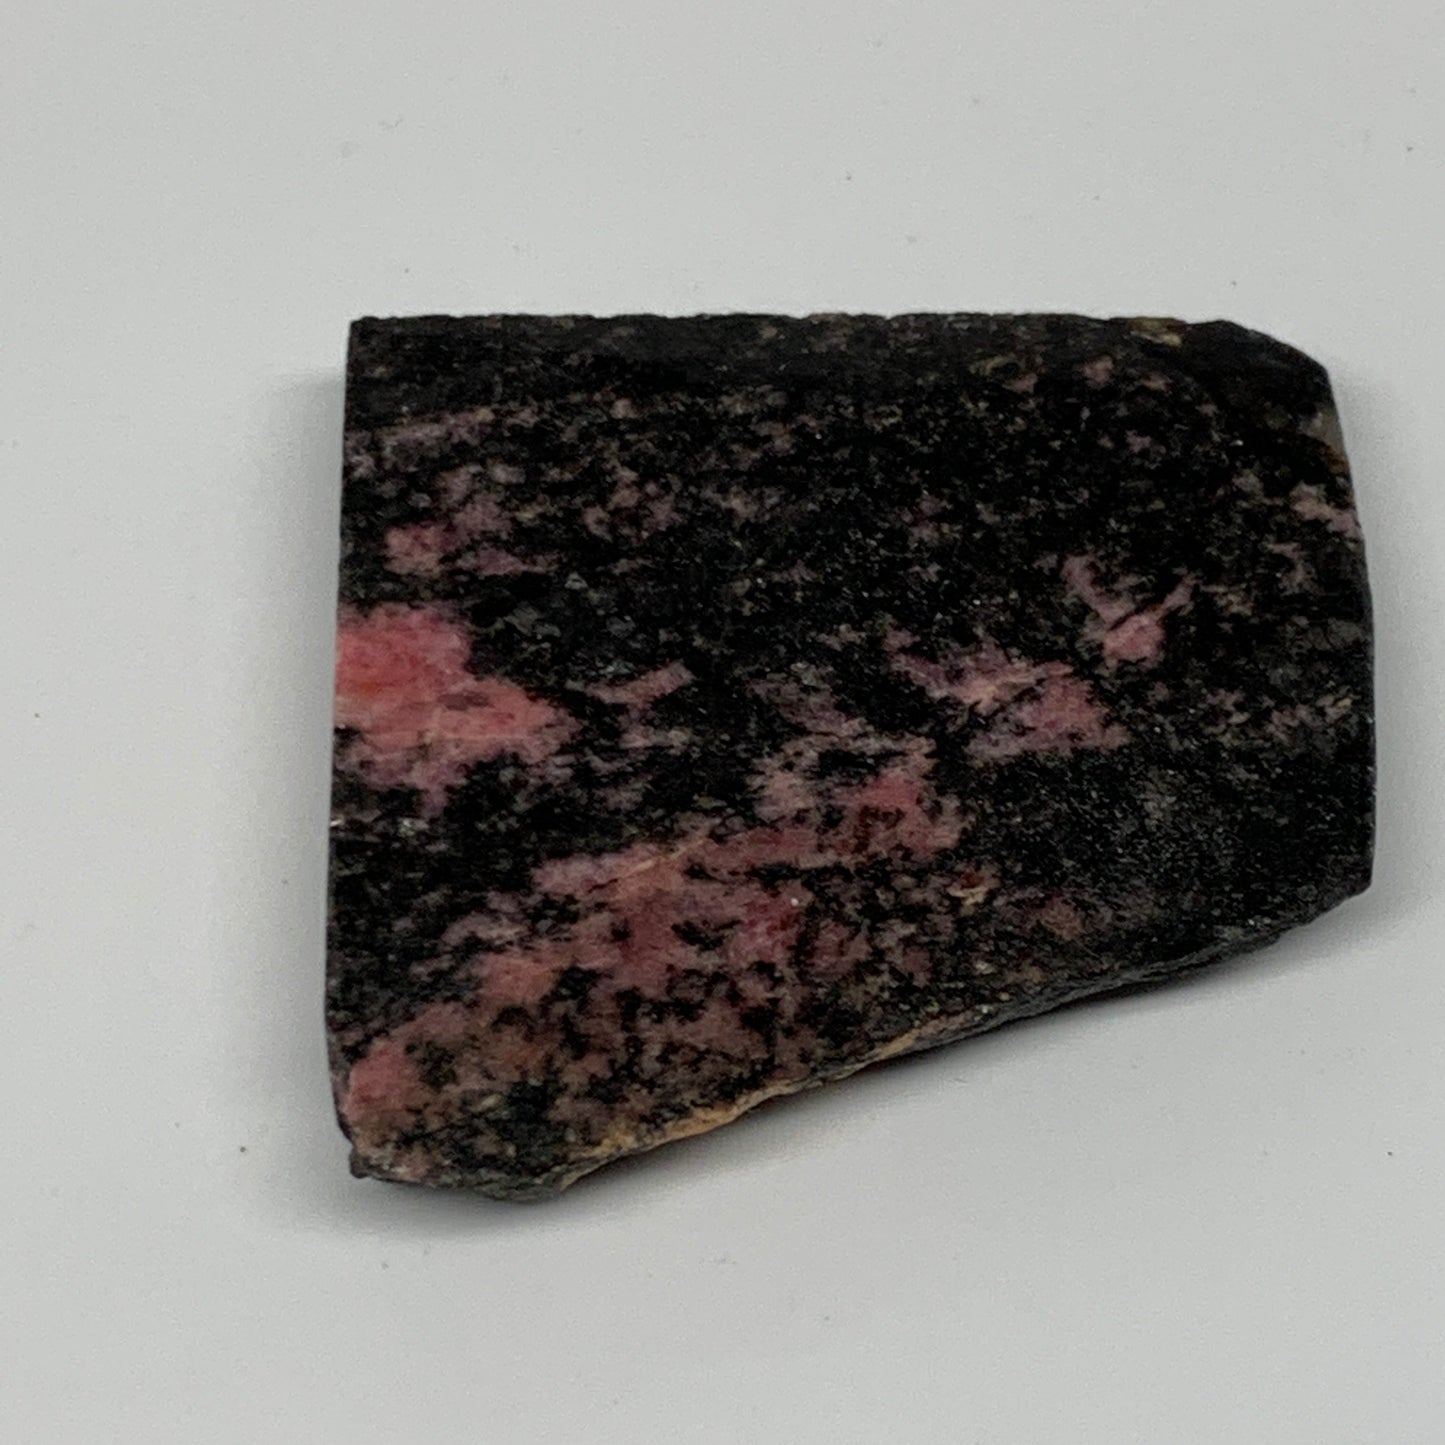 78.3g, 2.3"x2.2"x0.4", One face polished Rhodonite, One face semi polished, B159